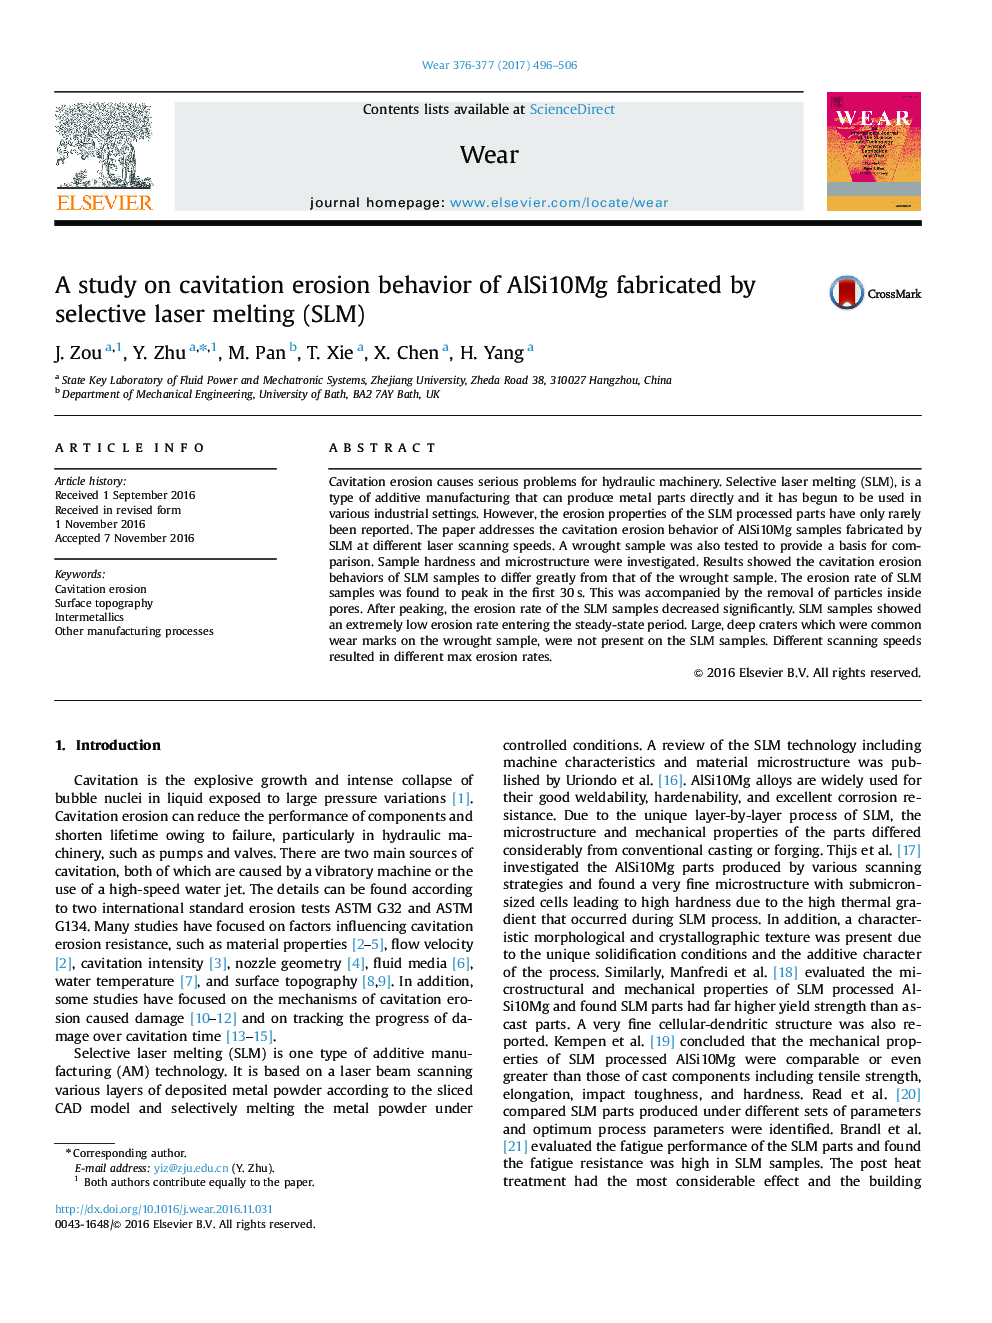 A study on cavitation erosion behavior of AlSi10Mg fabricated by selective laser melting (SLM)